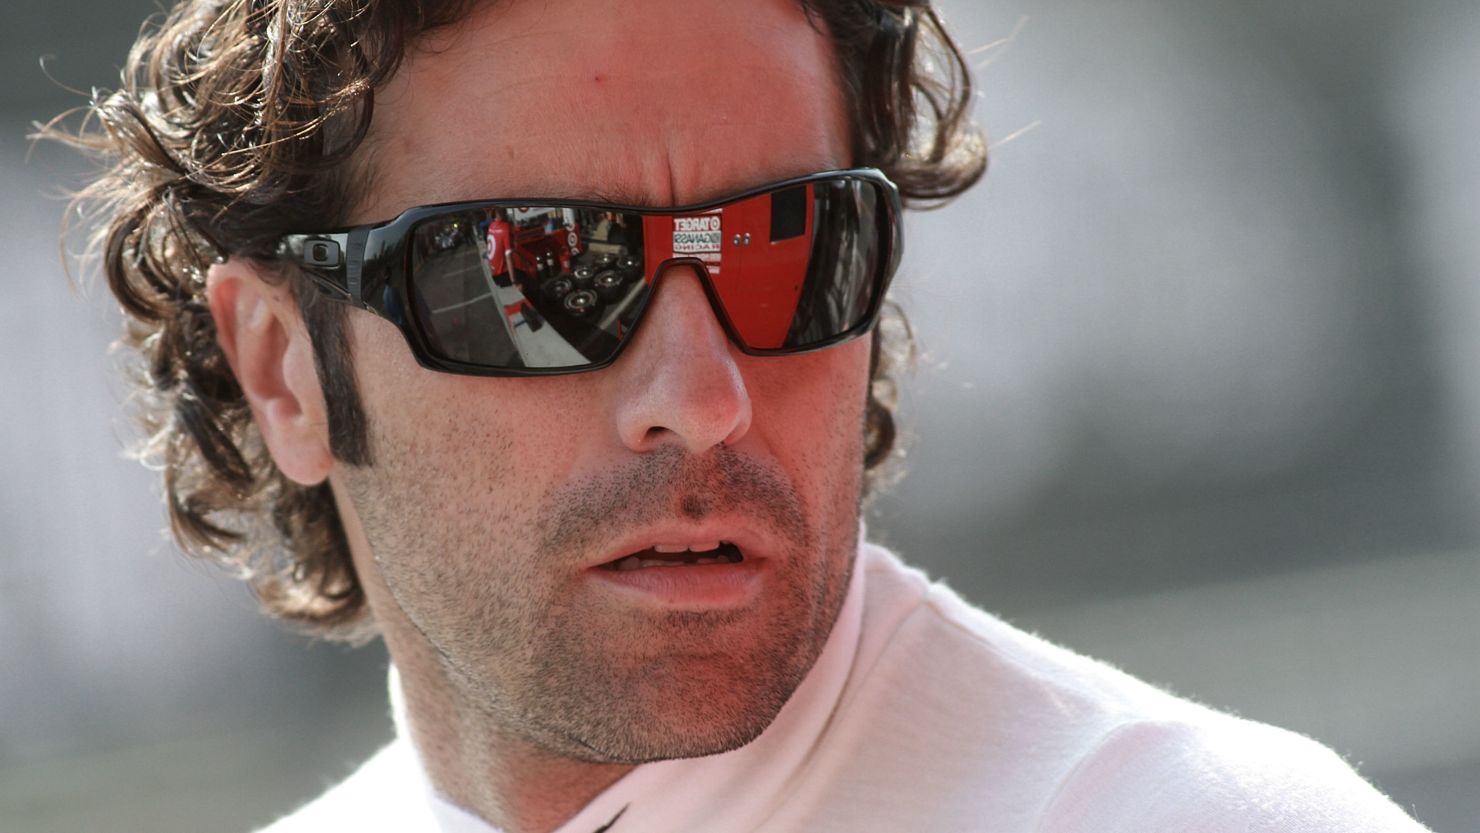 Dario Franchitti has retired from Indycar racing on the advice of doctors after a crash during an event in Houston.